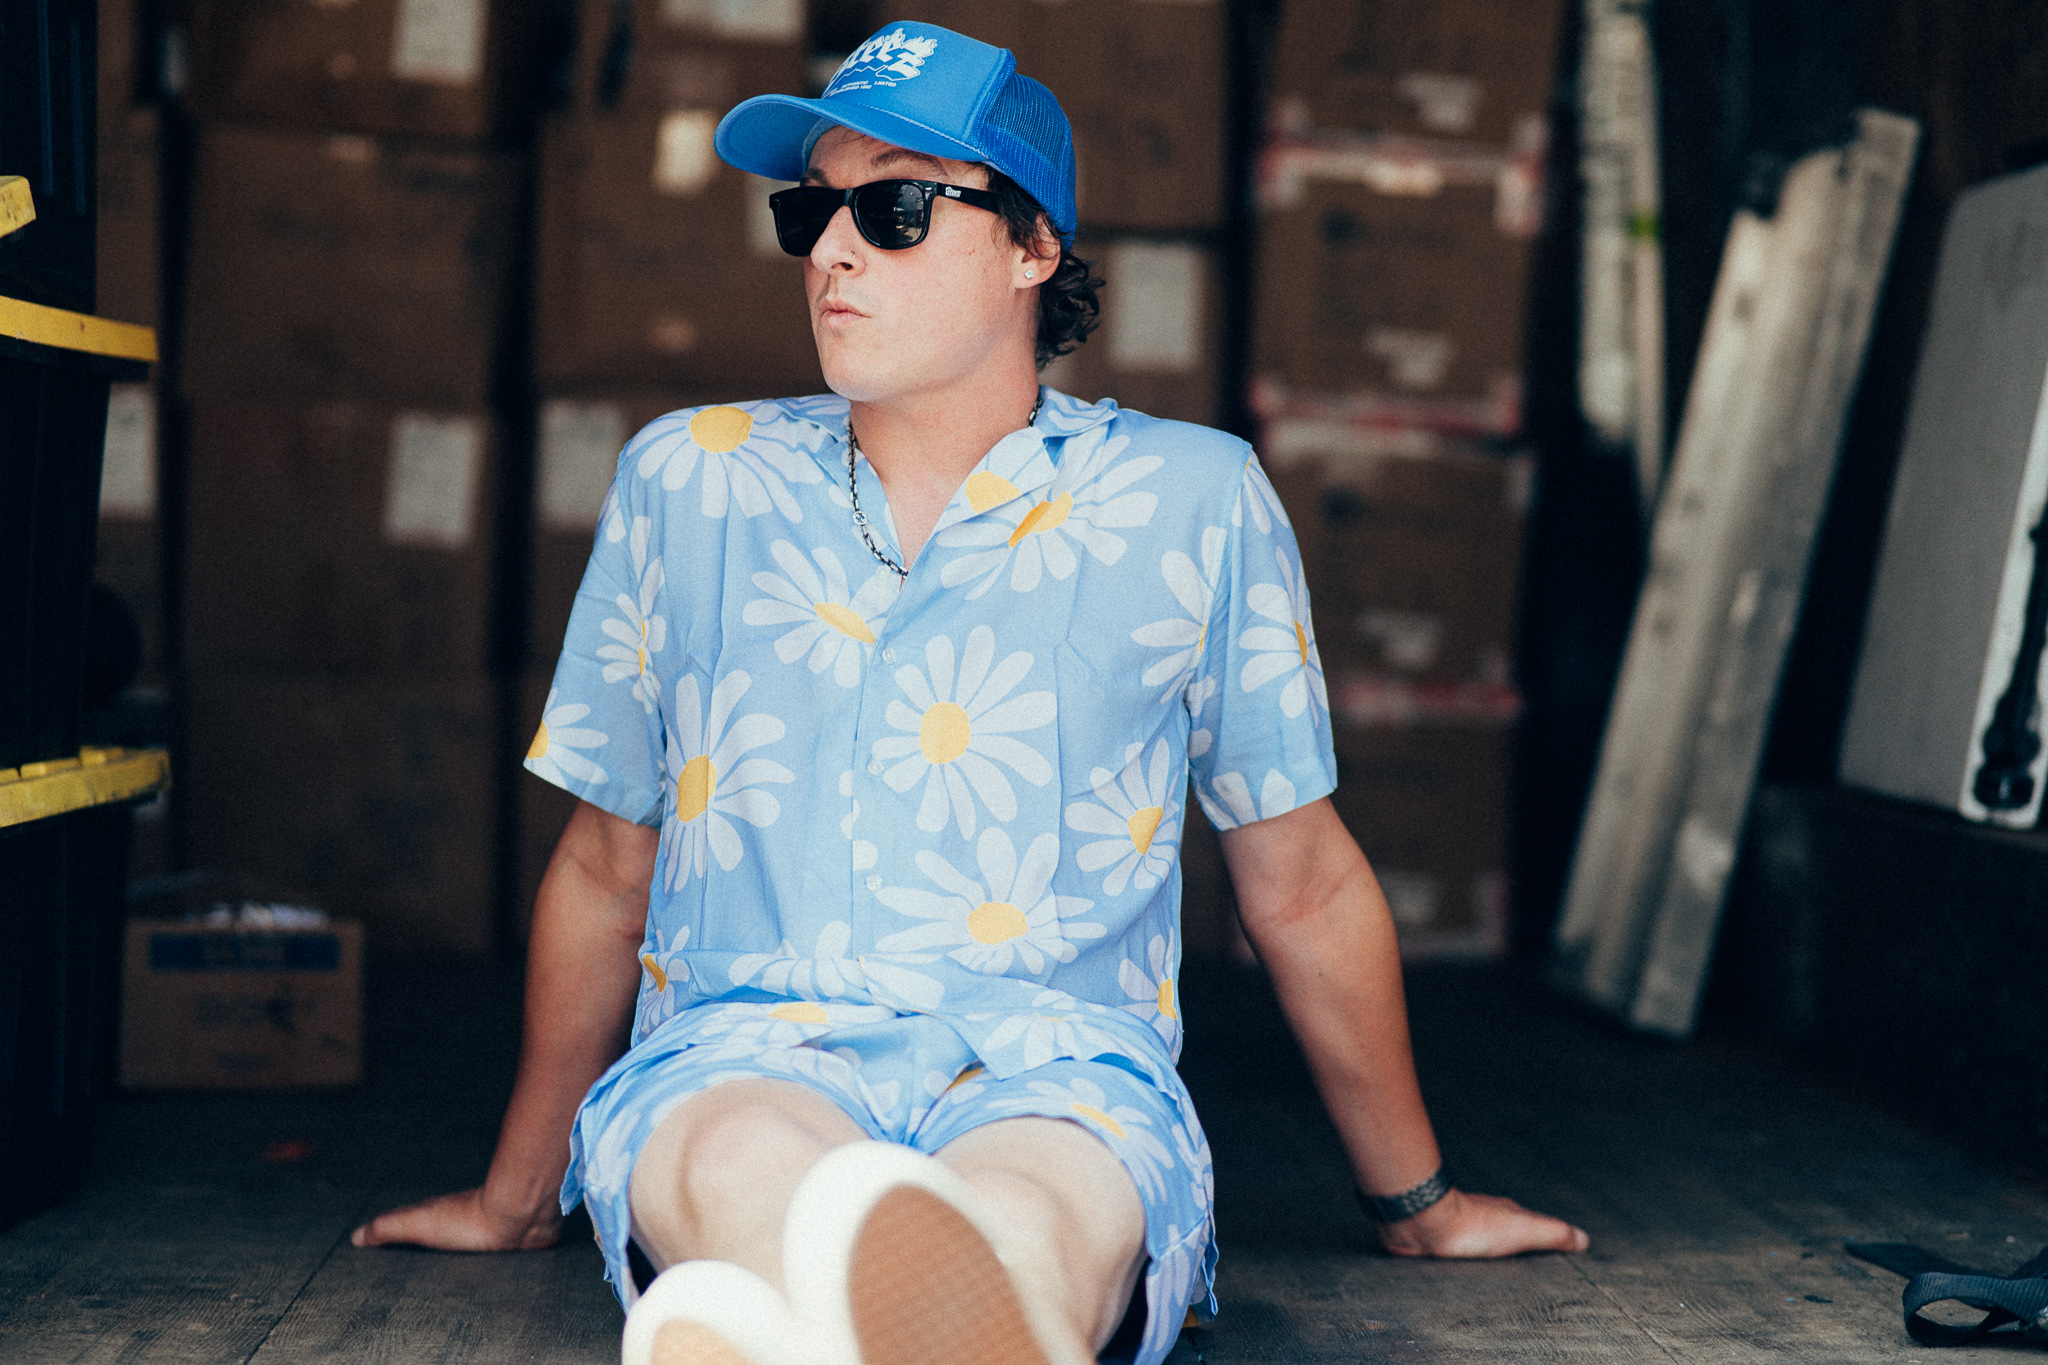 State Champs' Derek Discanio Doesn't Want His Streetwear Brand Defined By the Band